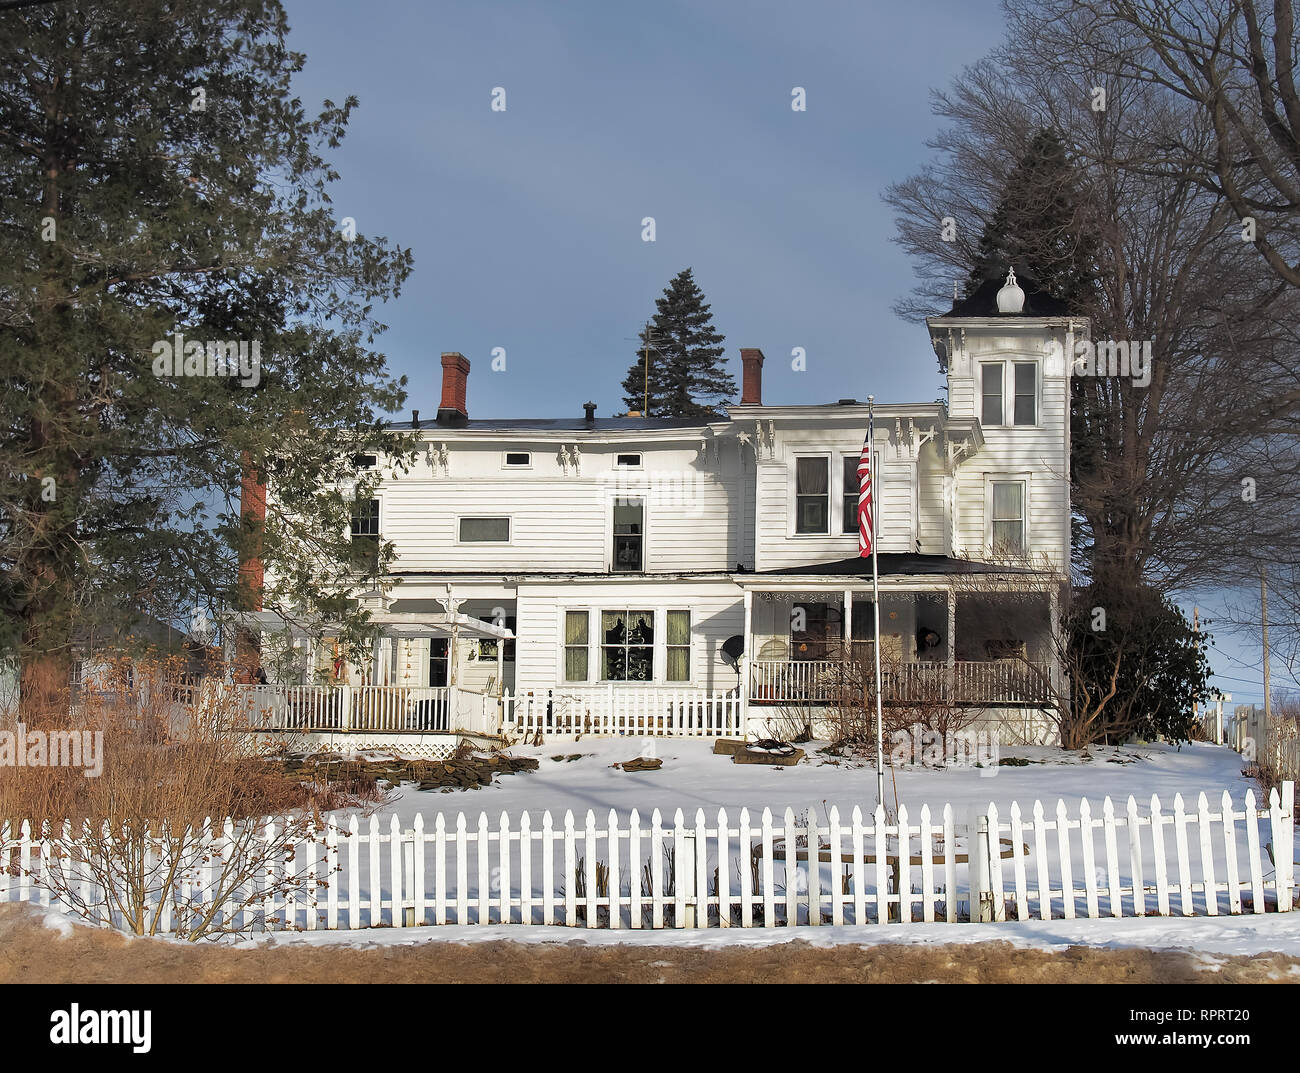 Old fashoined home with white picket fence in winter Stock Photo